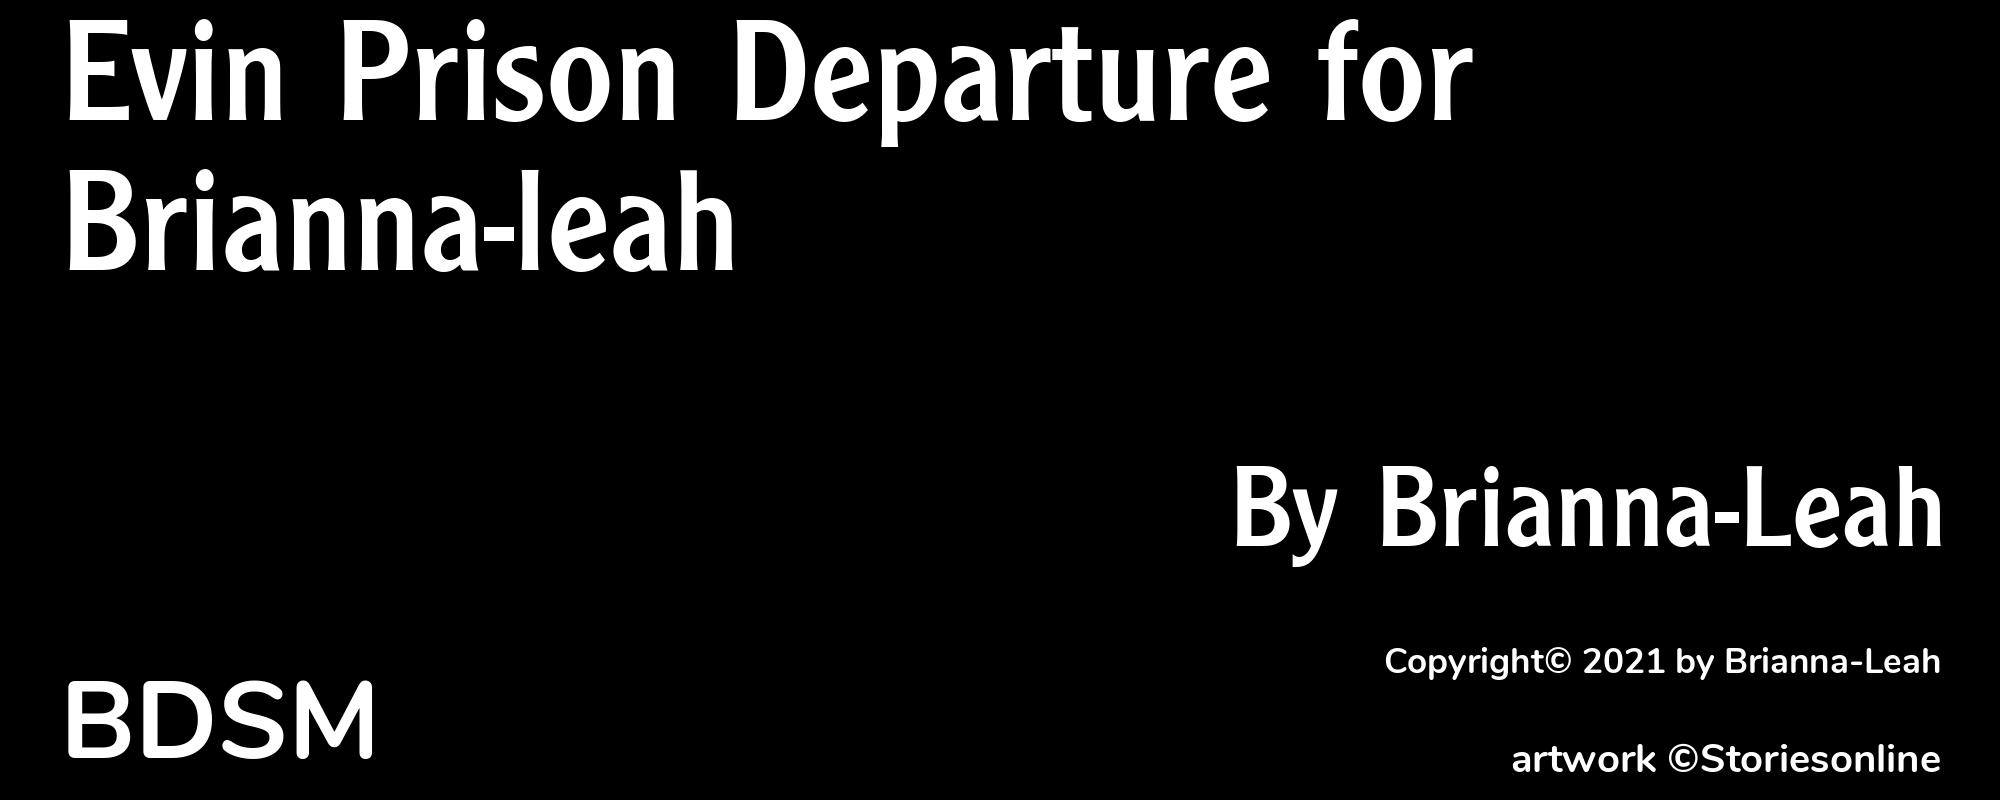 Evin Prison Departure for Brianna-leah - Cover